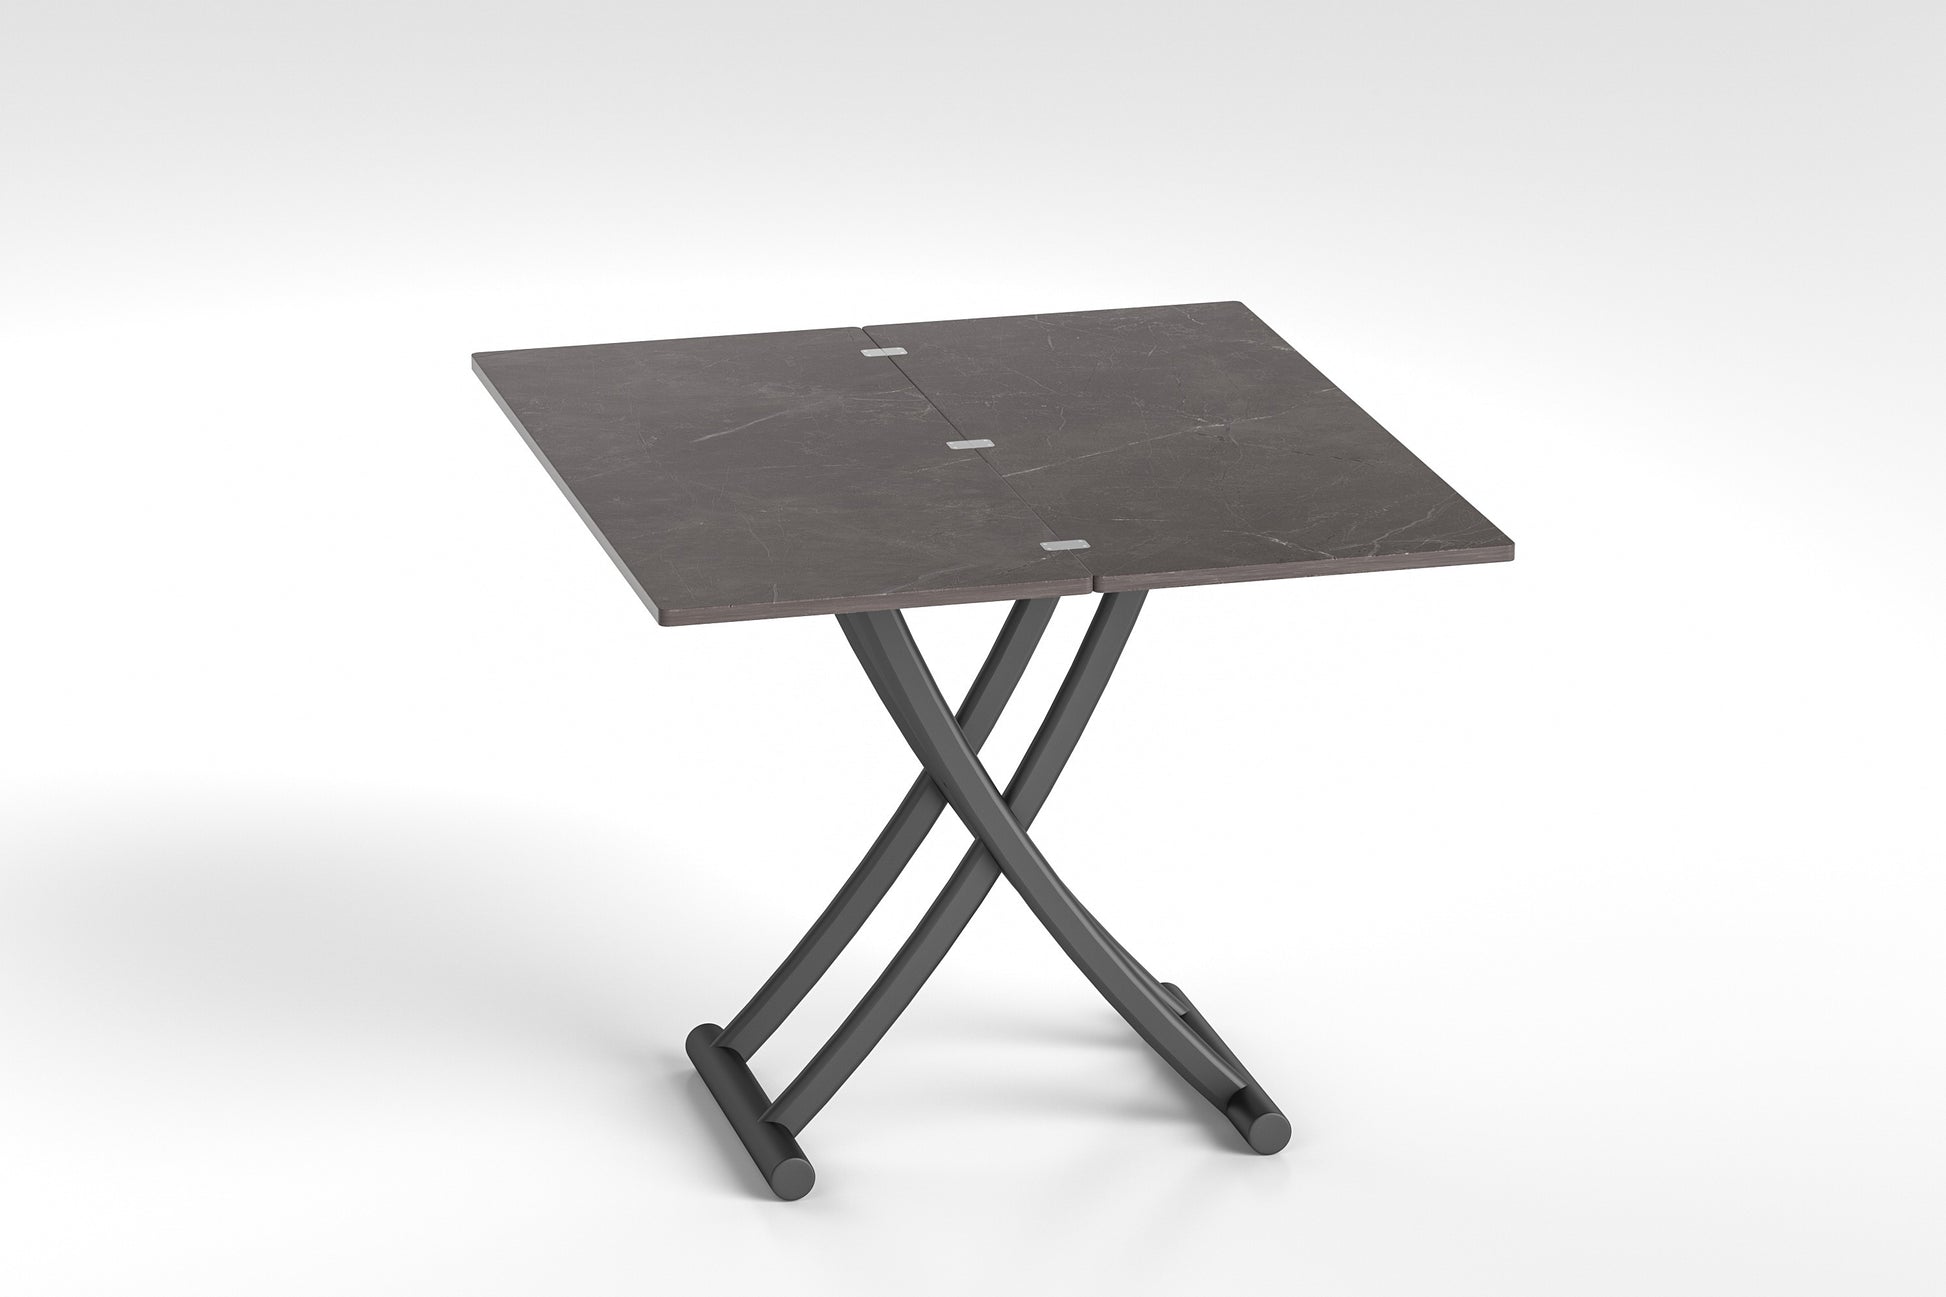 Black Transforming table, Expandable Coffee Table, Space-Saving Table, dinning table mode (left side view)